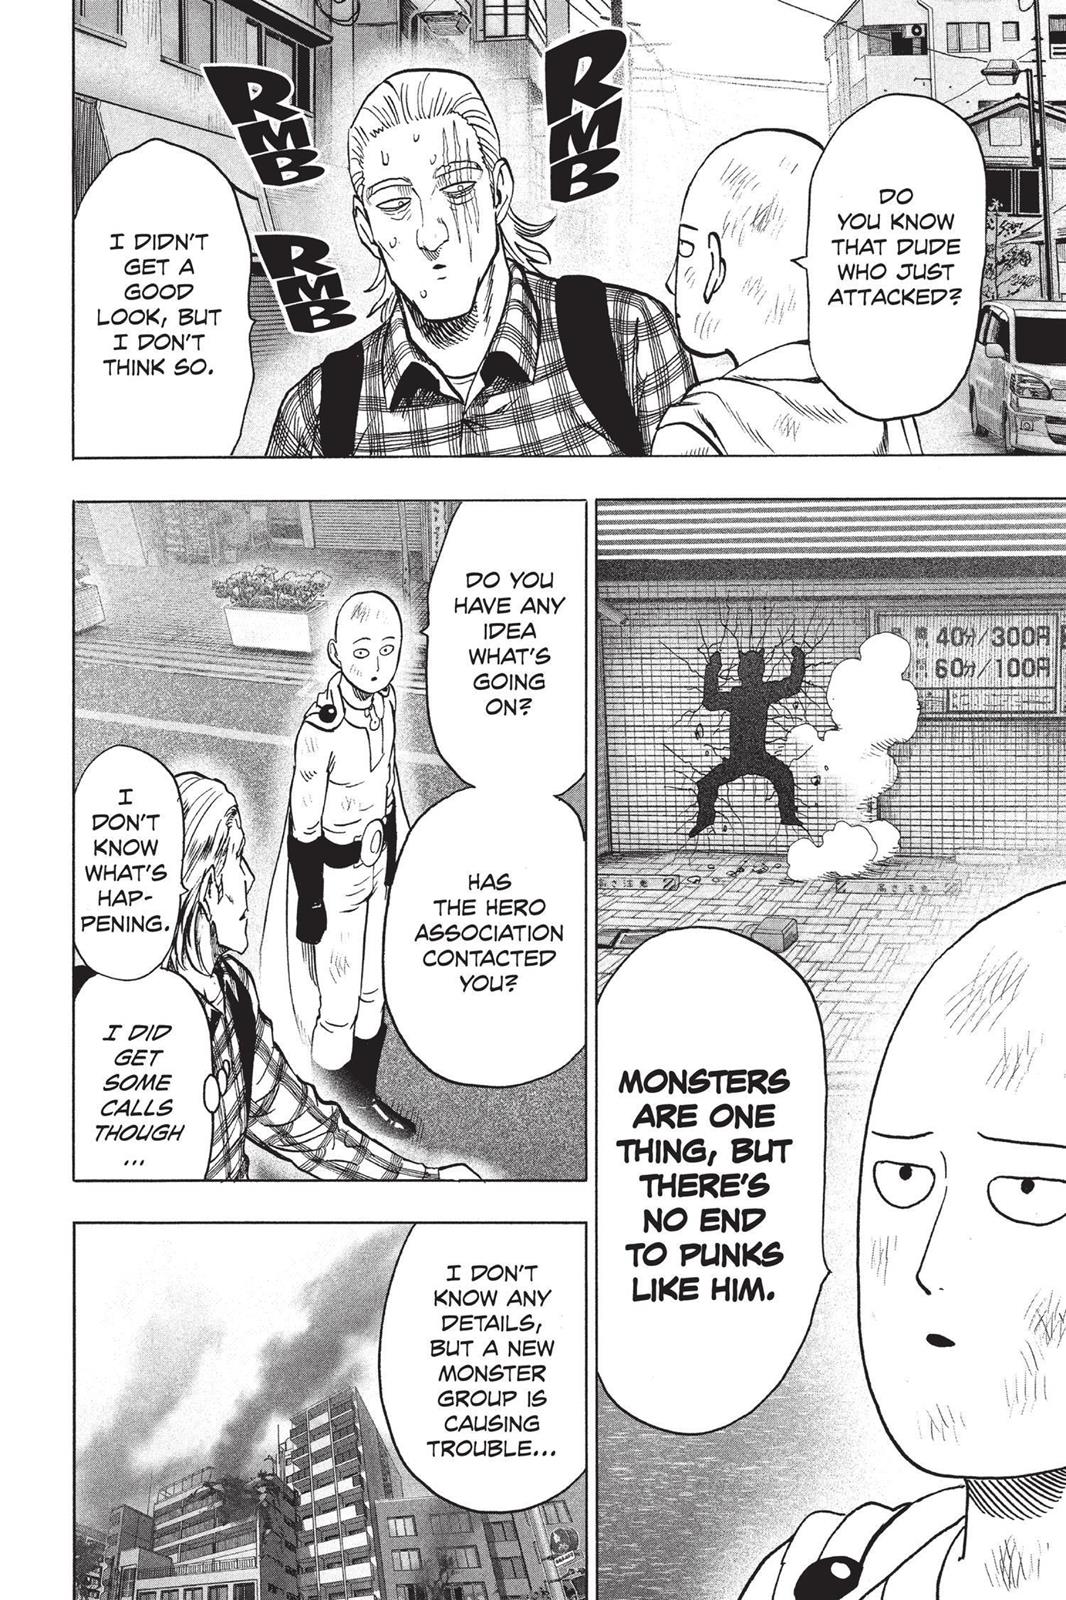 One-Punch Man, Punch 77 image 29